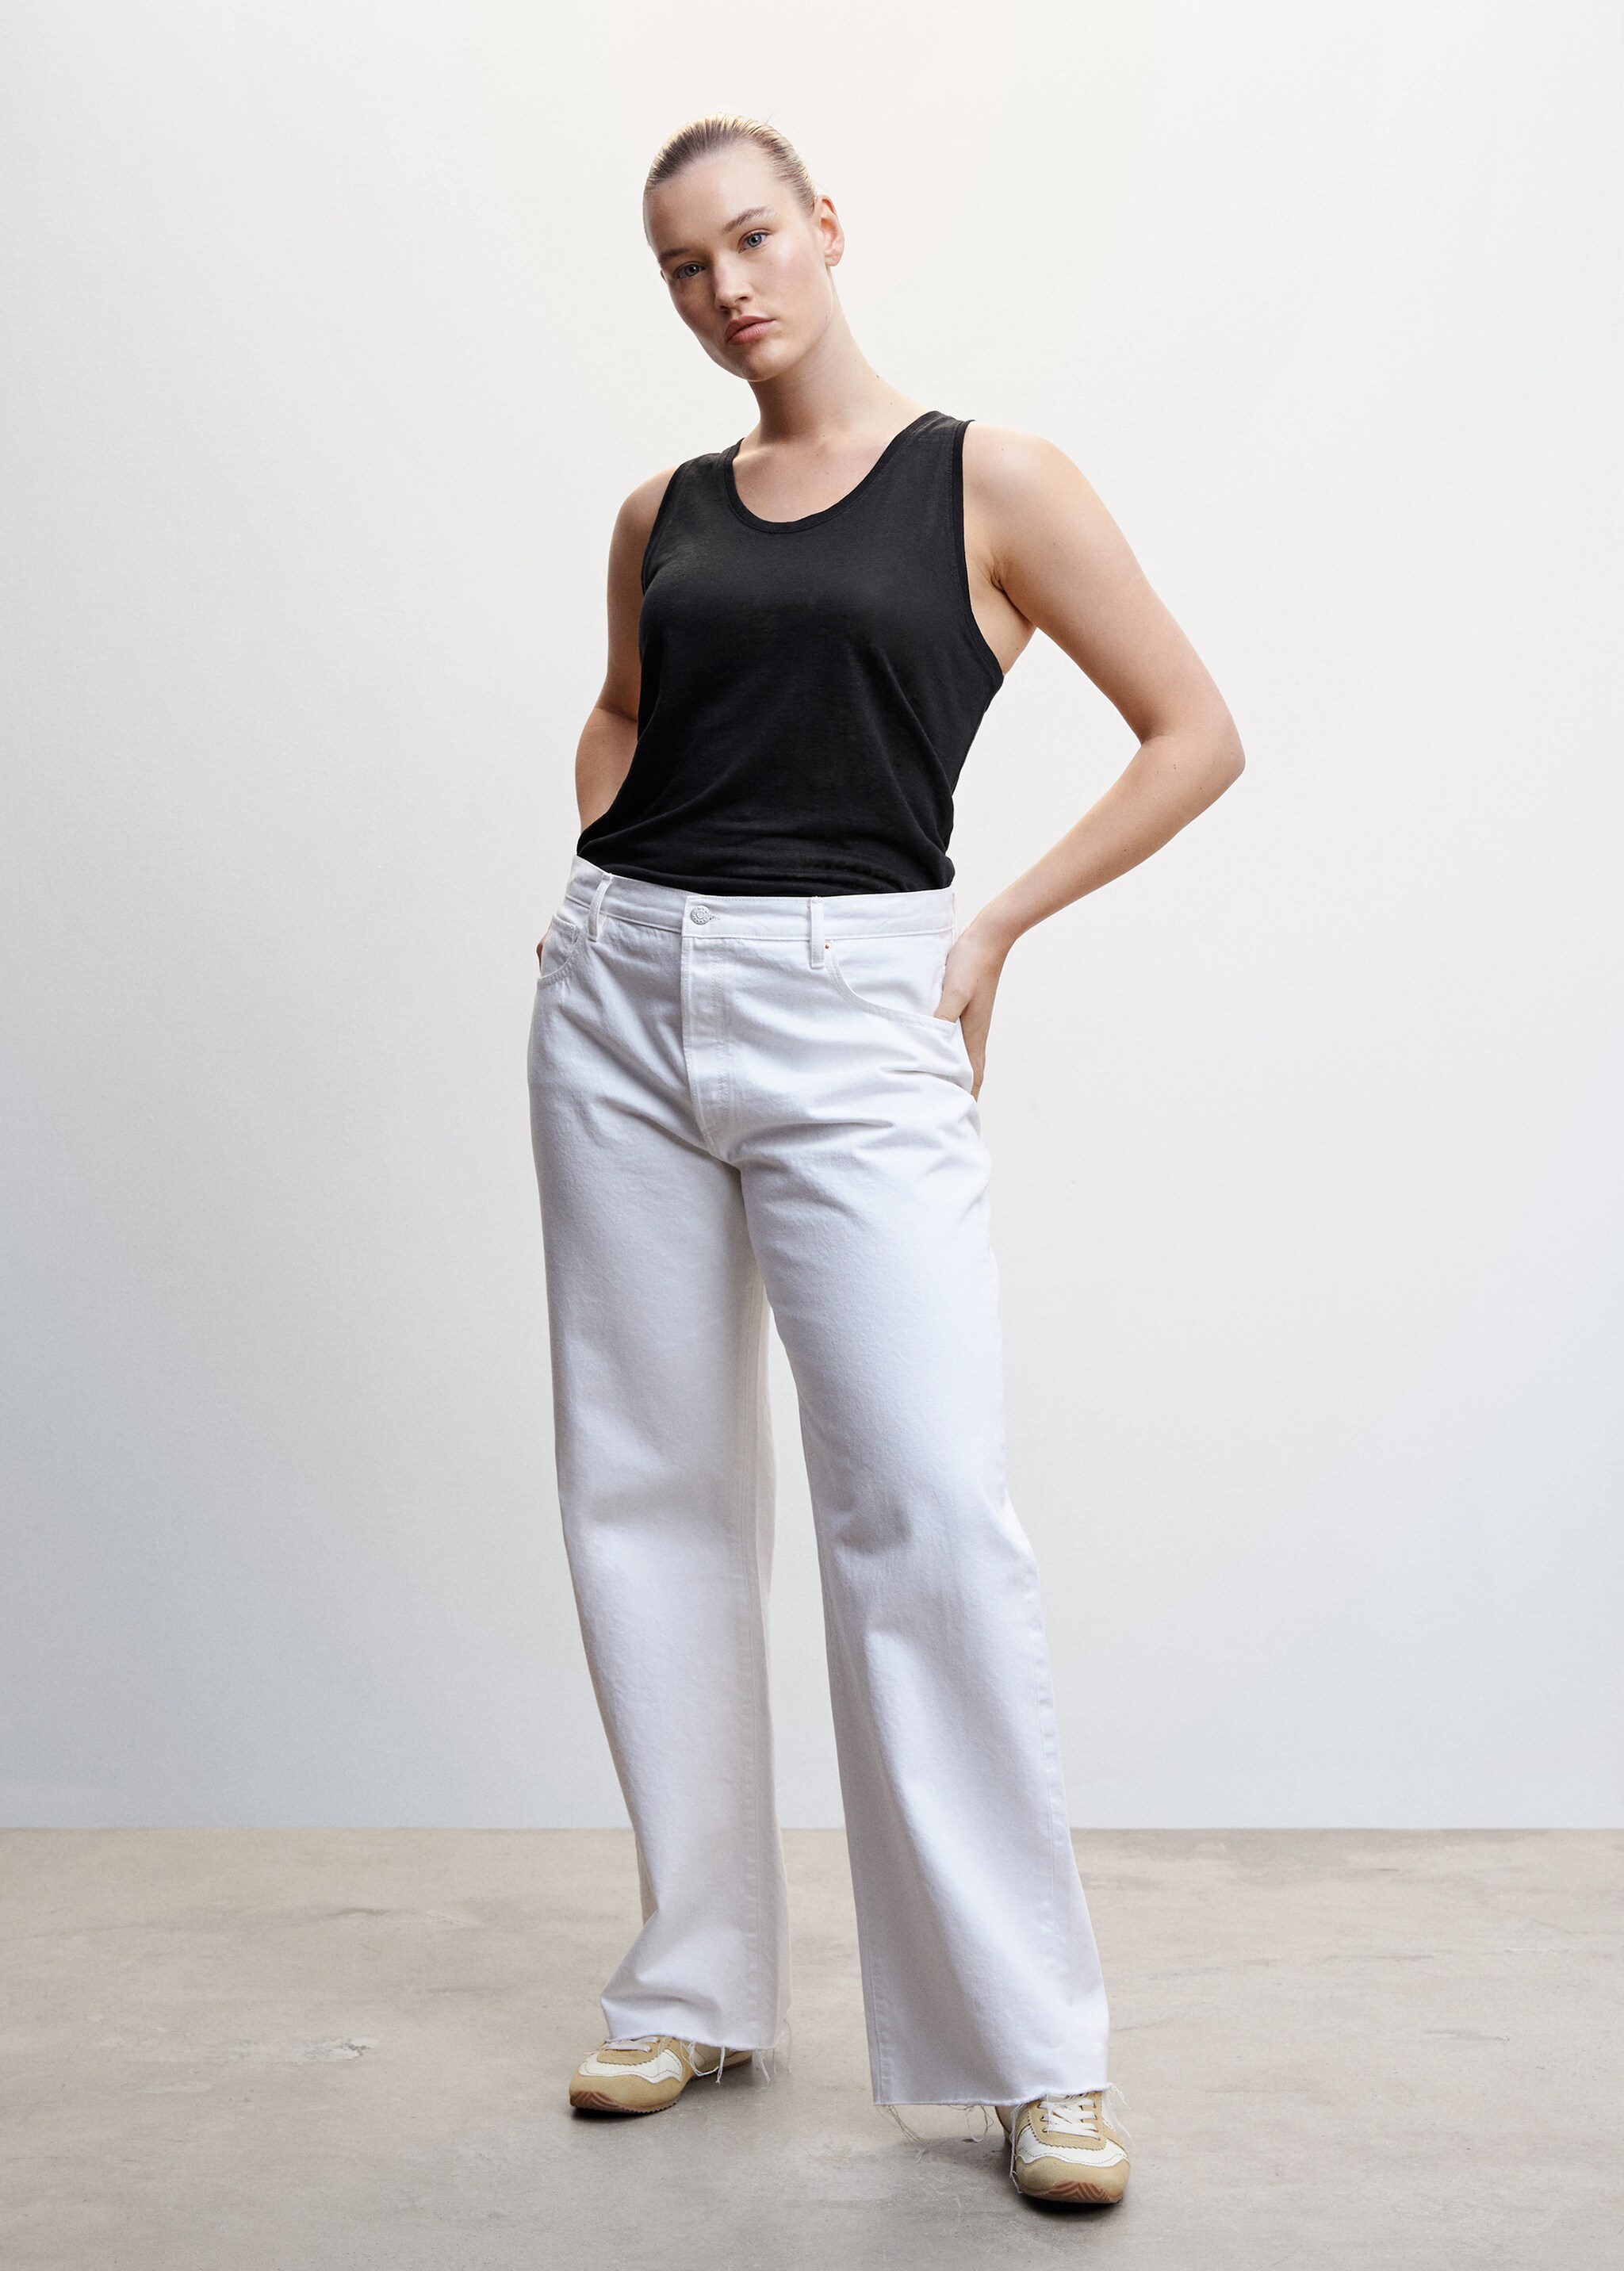 Strap linen top - Details of the article 3